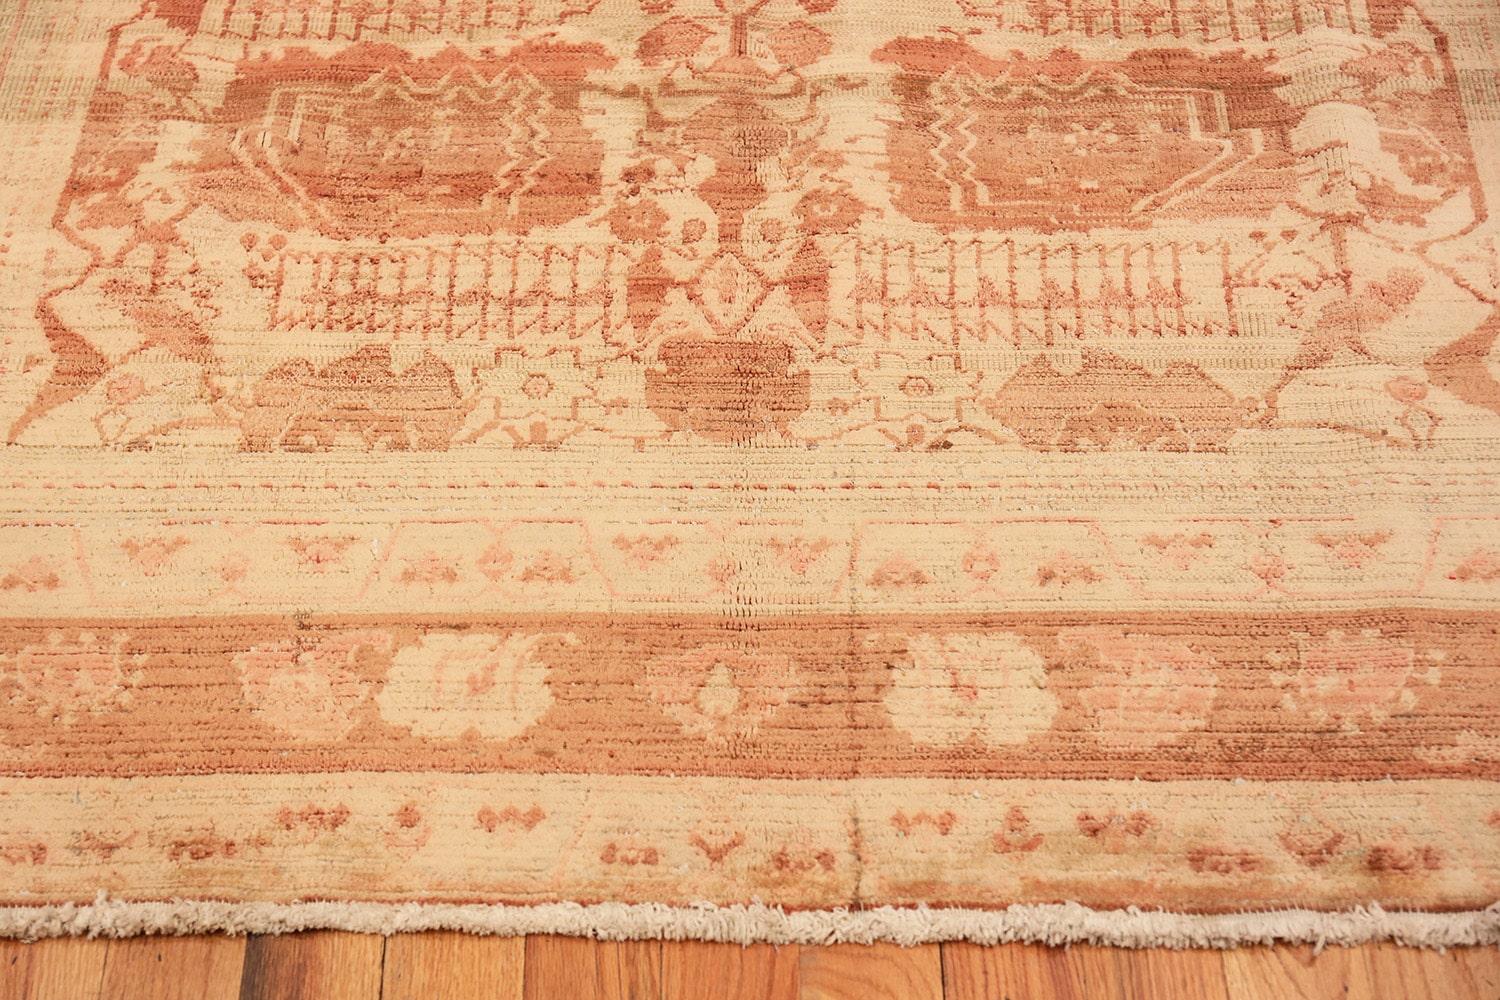 Antique Agra rug, country of origin / rug type: India, date circa 1920. Size: 5 ft 10 in x 8 ft 7 in (1.78 m x 2.62 m).